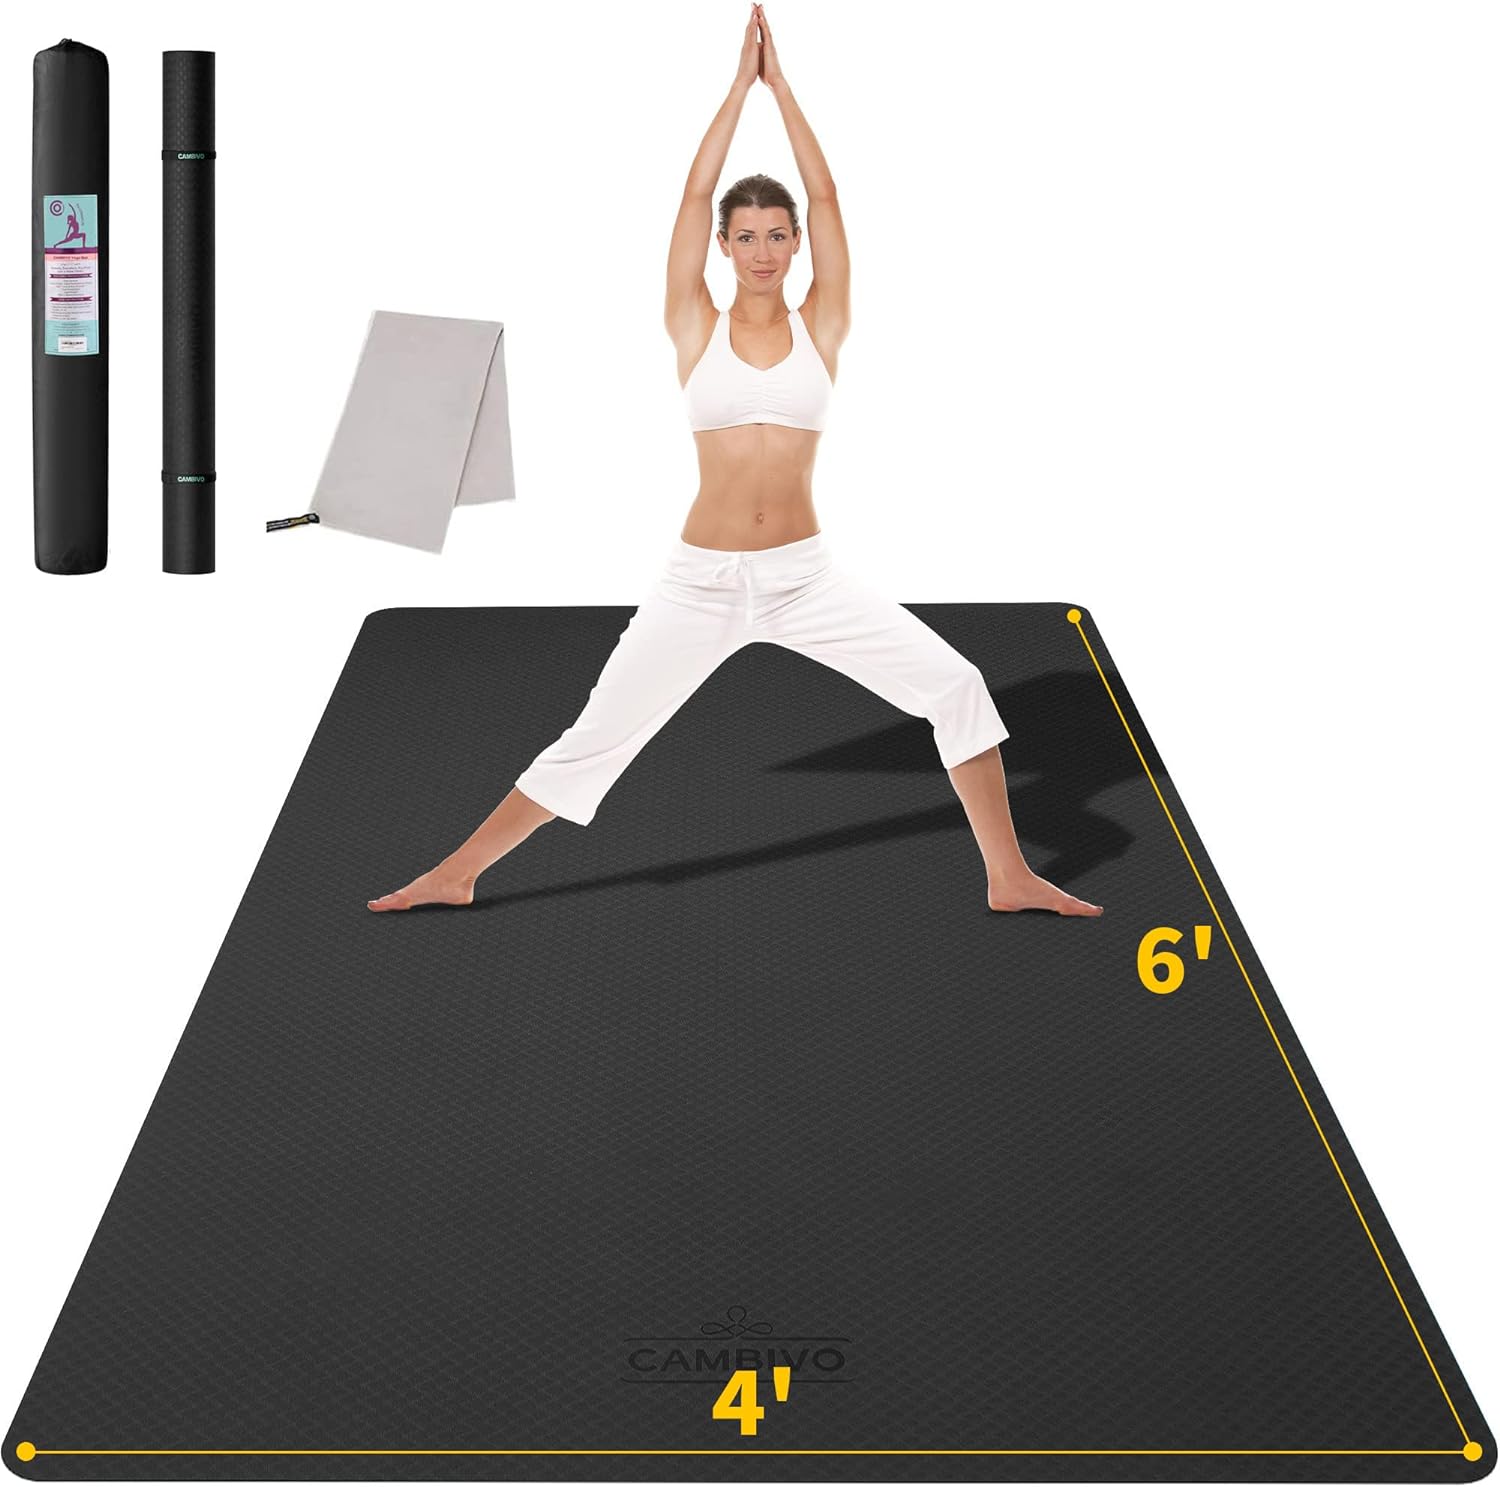 The best yoga mats: 8 buys that will help you perfect your practice